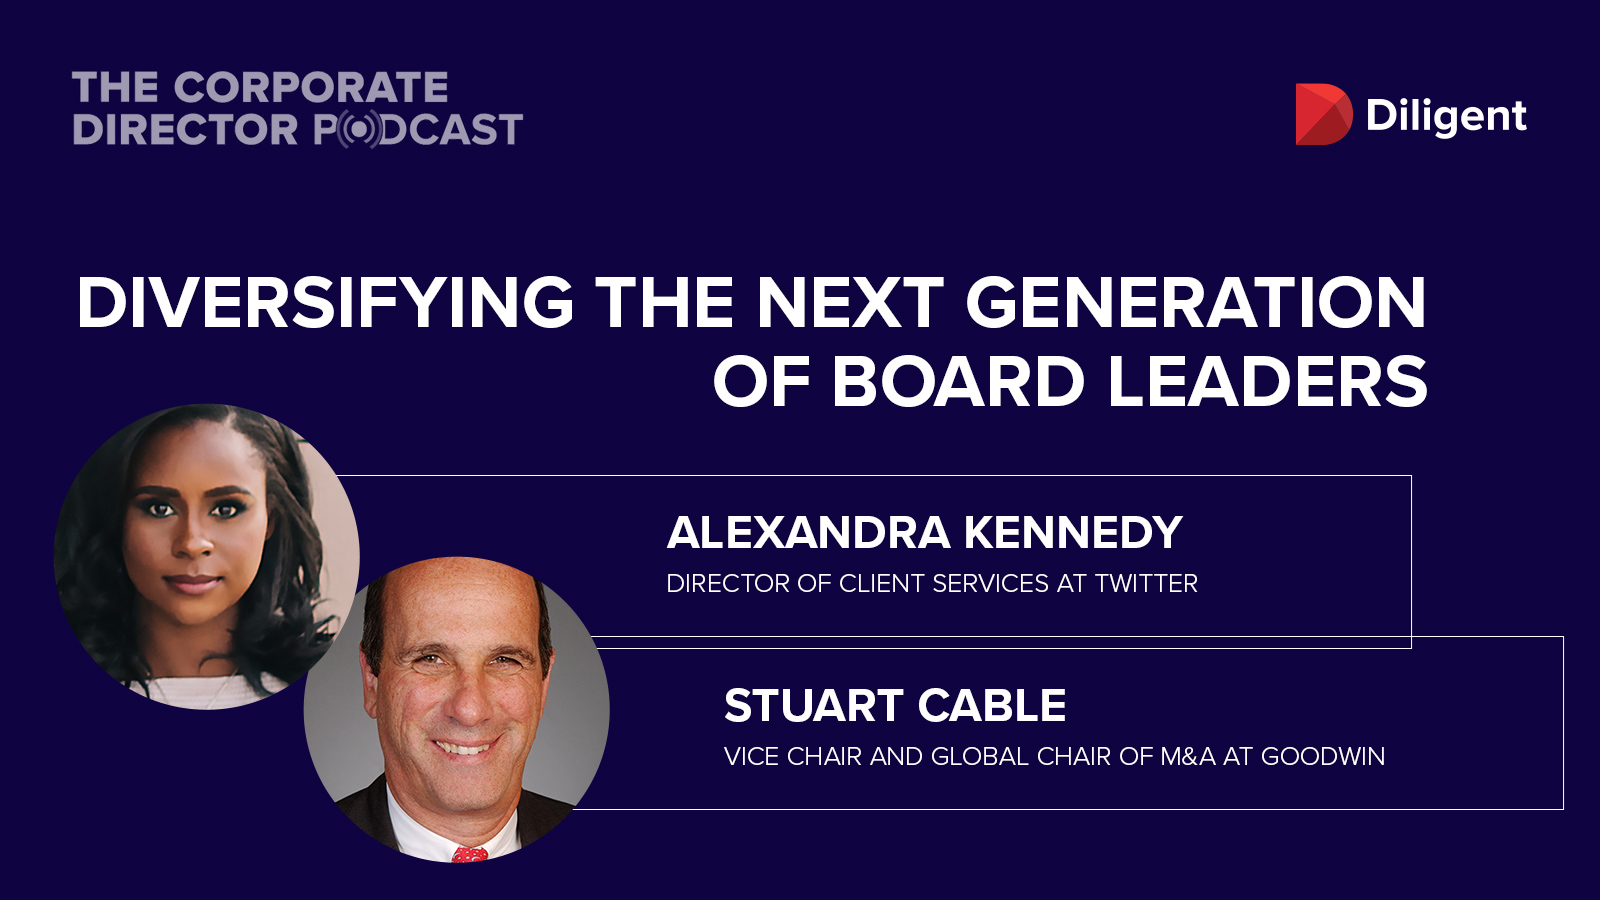 Diligent Corporate Director Podcast Diversifying the Next Generation of Board Leaders